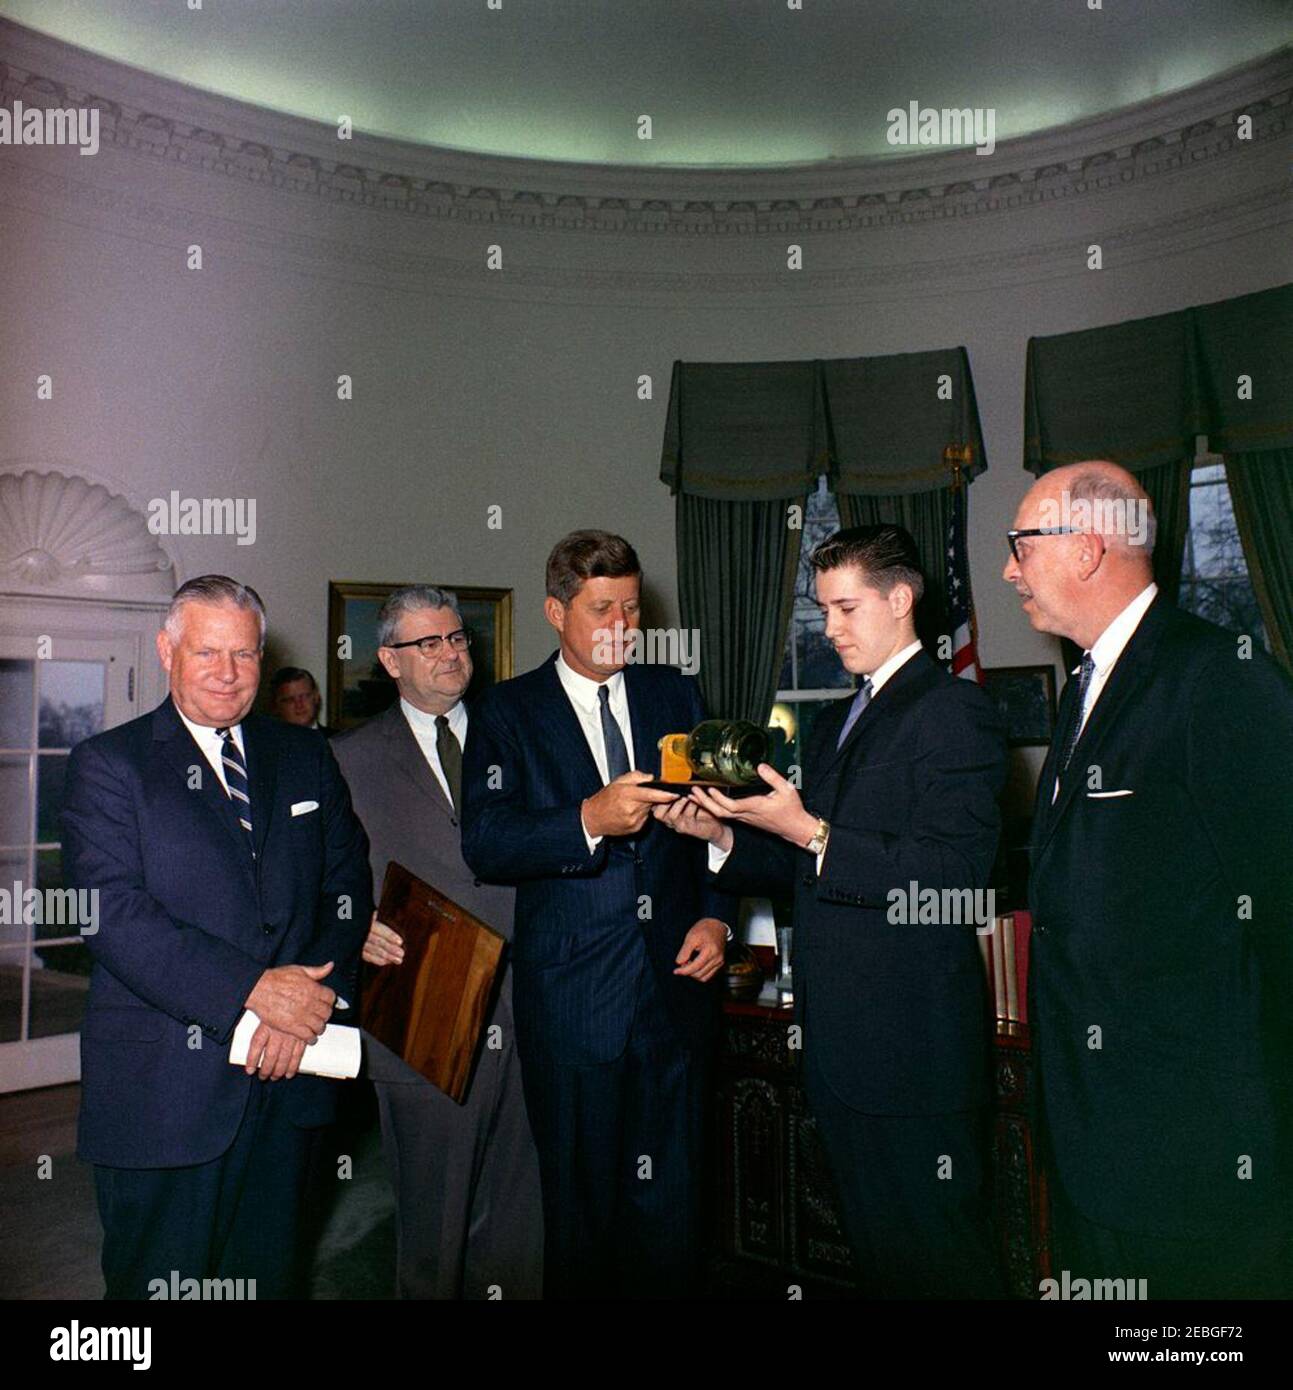 Visit of the Boysu0027 Clubsu0027 u0022Boy of the Year,u0022 Stephen Lutz, 10:57AM. President John F. Kennedy (center) holds a scale model, enclosed inside a bottle, of PT Boat 109, presented to him by the Boysu0027 Clubs of Americau0027s (BCA) u0022Boy of the Yearu0022 Stephen Lutz of Newark, New Jersey. (L-R) Albert L. Cole, President of the BCA; unidentified man (in back, partially hidden); John M. Gleason, National Director of the BCA; President Kennedy; Stephen Lutz; and Charles R. Messier, Executive Director of the Boysu0027 Clubs of Newark, New Jersey. Oval Office, White House, Stock Photo